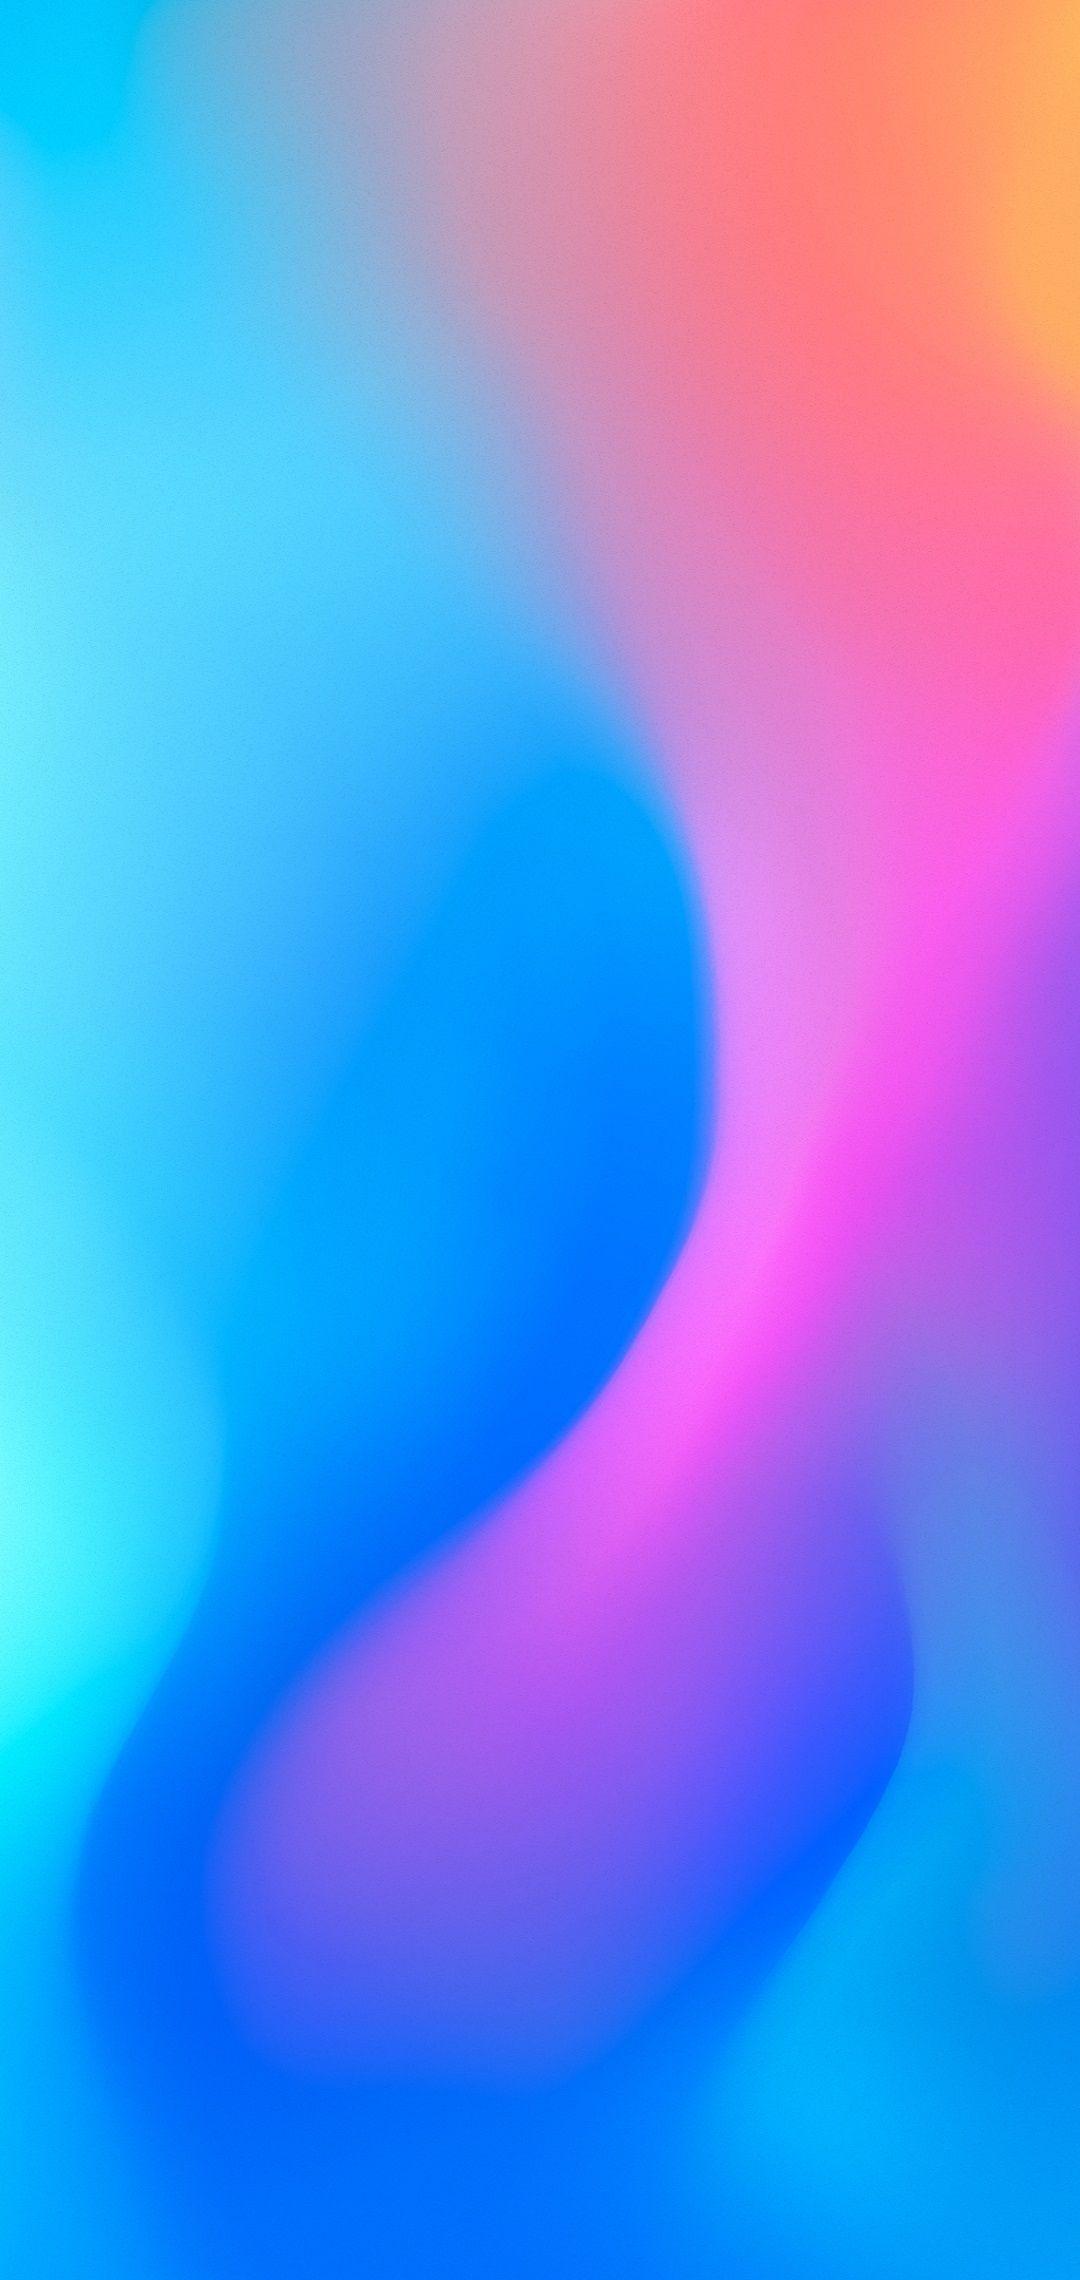 Redmi 6 Pro Wallpapers - Top Free Redmi 6 Pro Backgrounds - WallpaperAccess